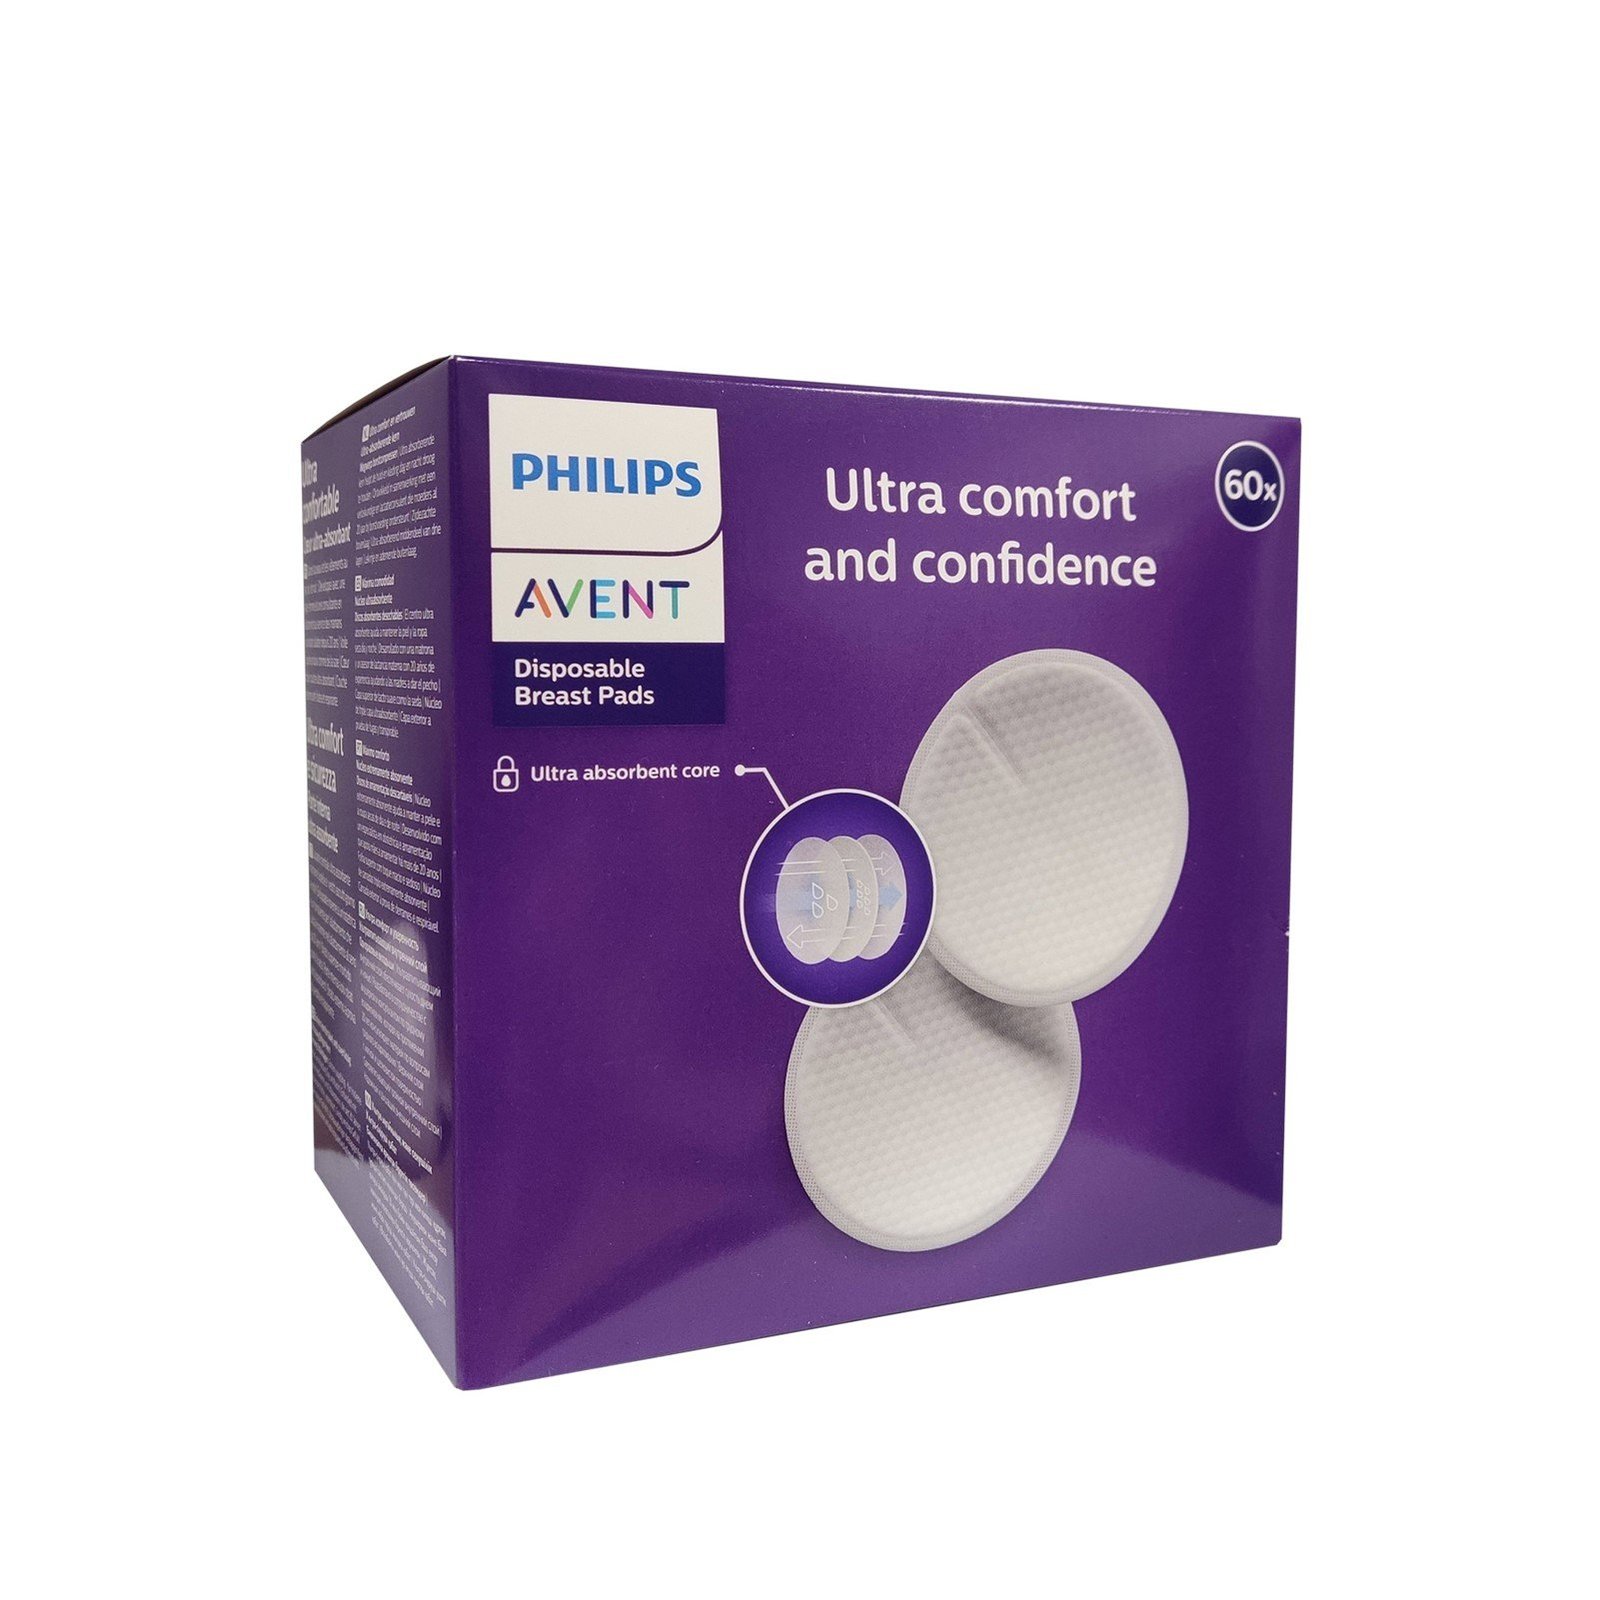 https://static.beautytocare.com/cdn-cgi/image/width=1600,height=1600,f=auto/media/catalog/product//p/h/philips-avent-disposable-breast-pads-x60.jpg